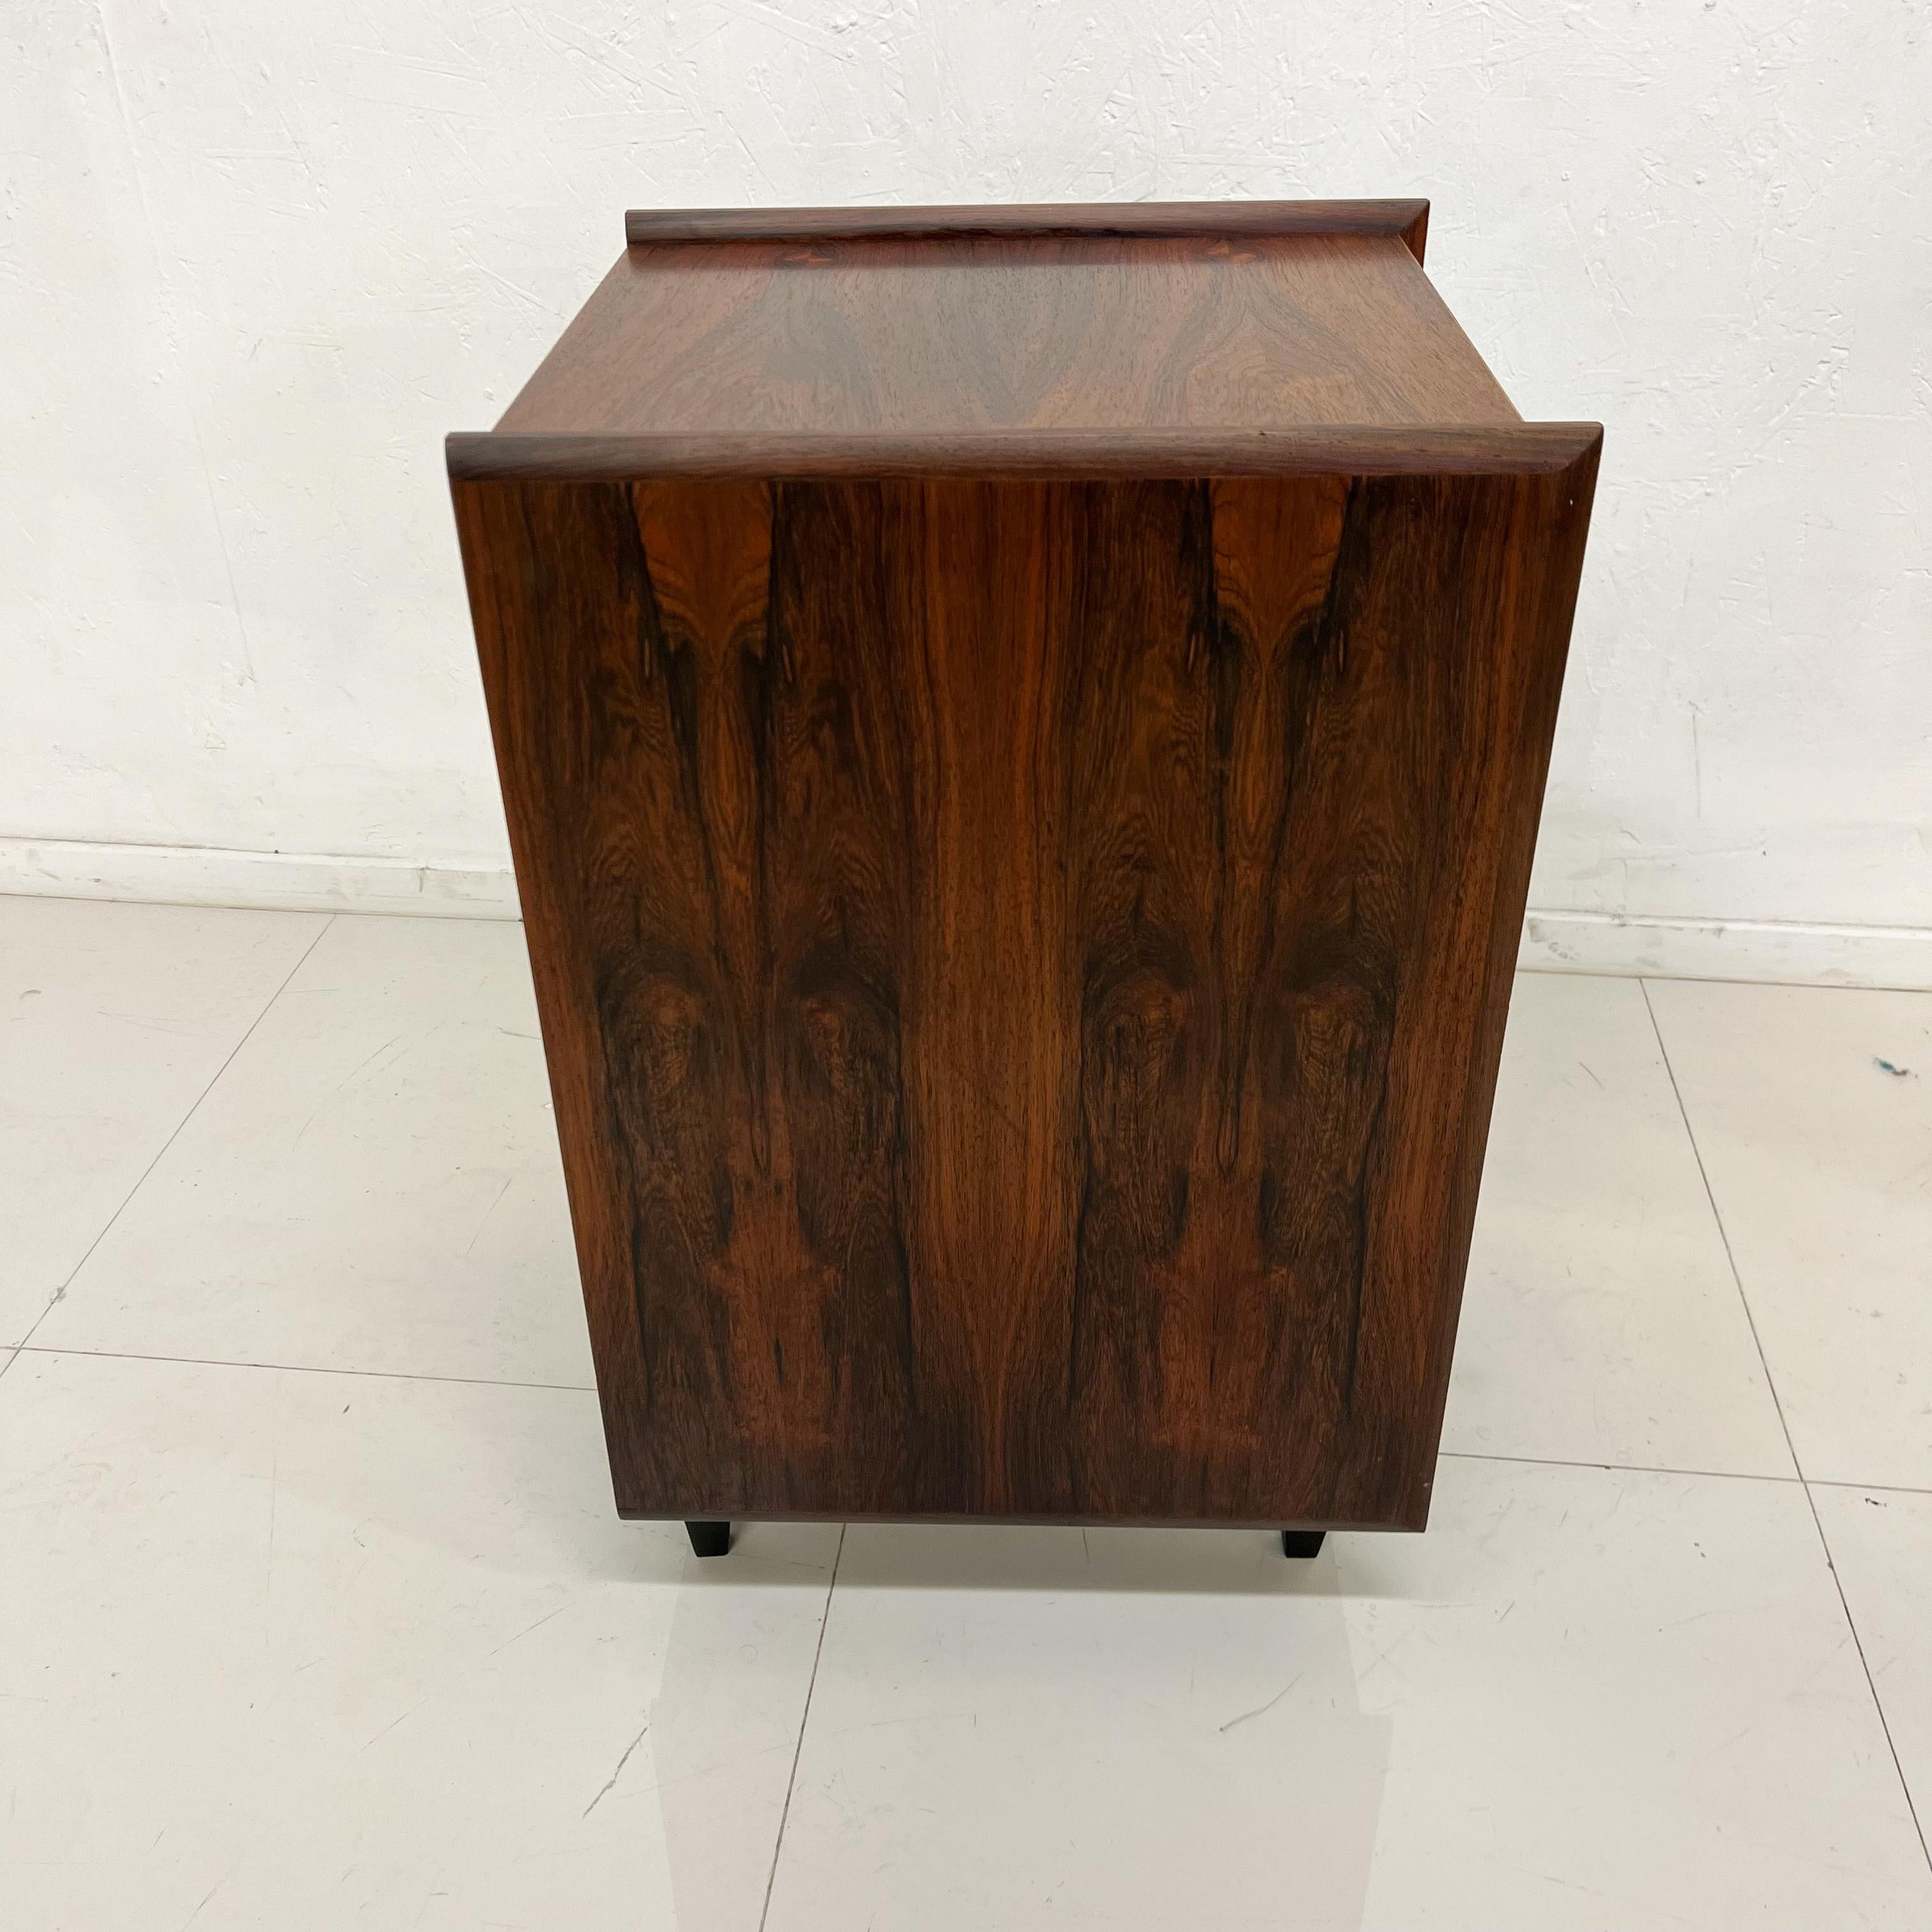 Side Table
Pega by Ib Juul Christensen of Norway circa 1960s
Unmarked
Elegant Rosewood Side Table with drawer
Functions as Cubby Cabinet Nightstand Bookcase
Versatile piece hooks allow attachment to wall unit.
Legs retrofitted for independent use as